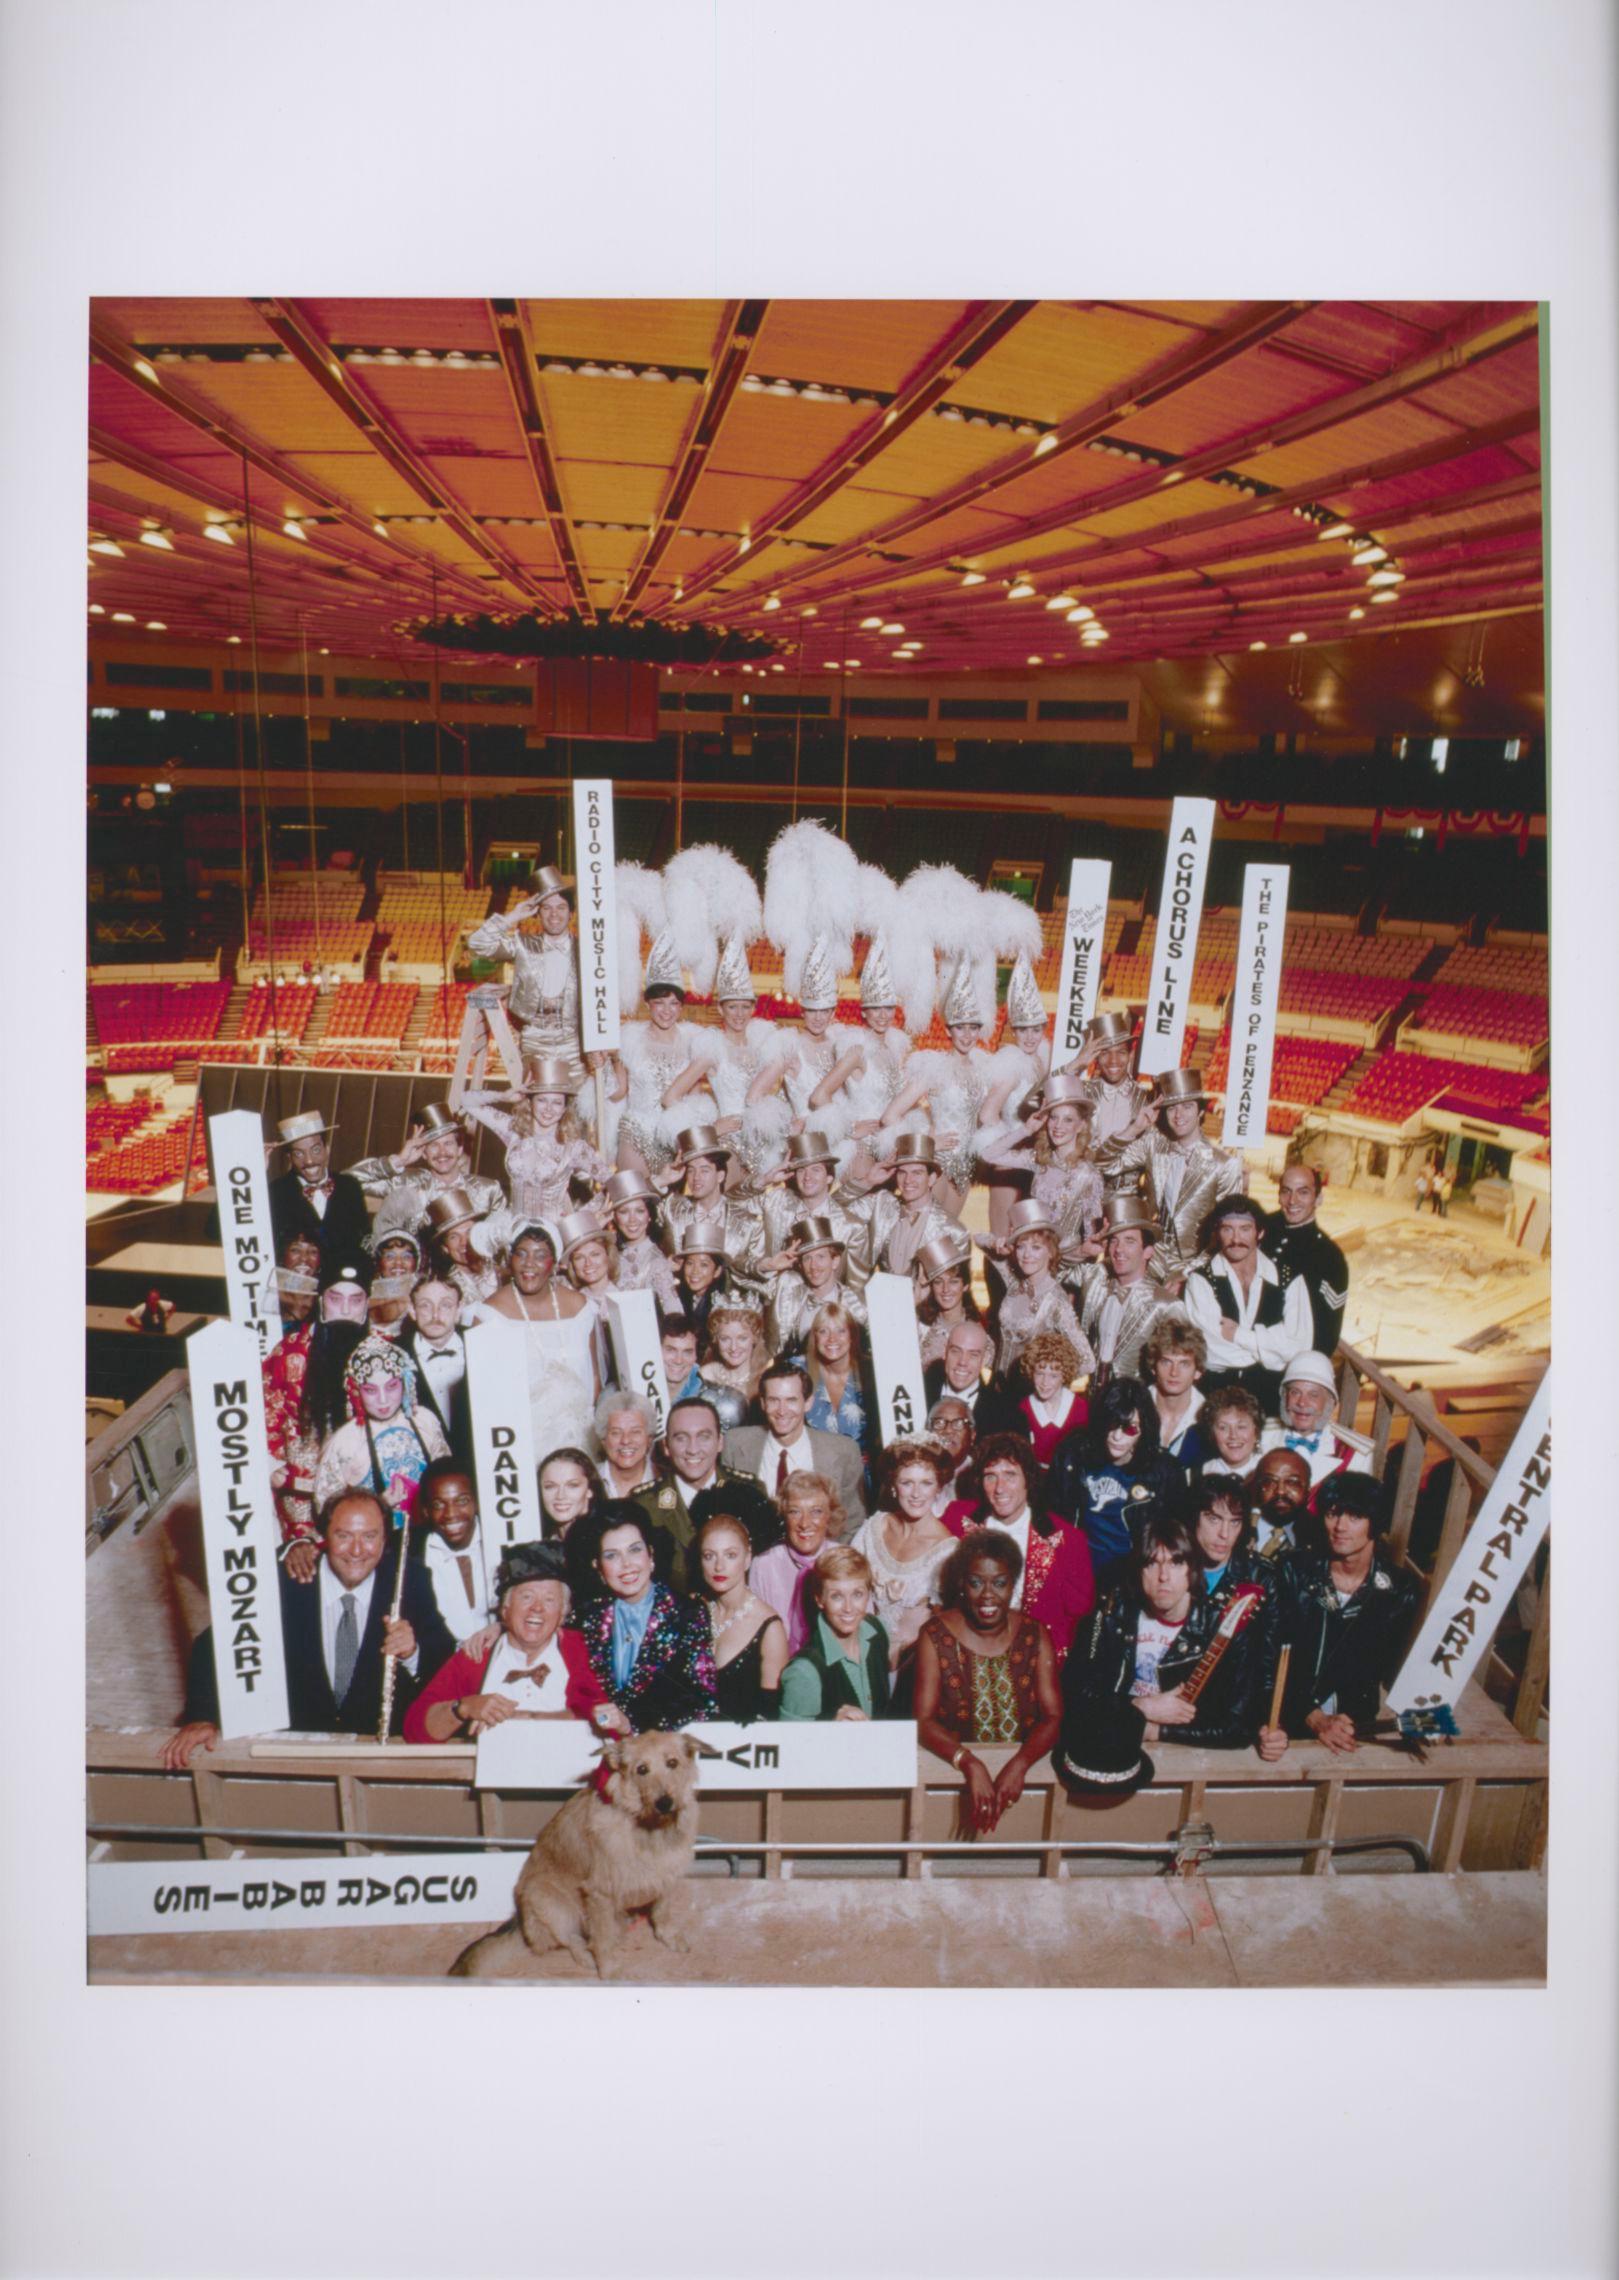 Jack Mitchell Color Photograph - Broadway show stars in an unusual group portrait in Madison Square Garden